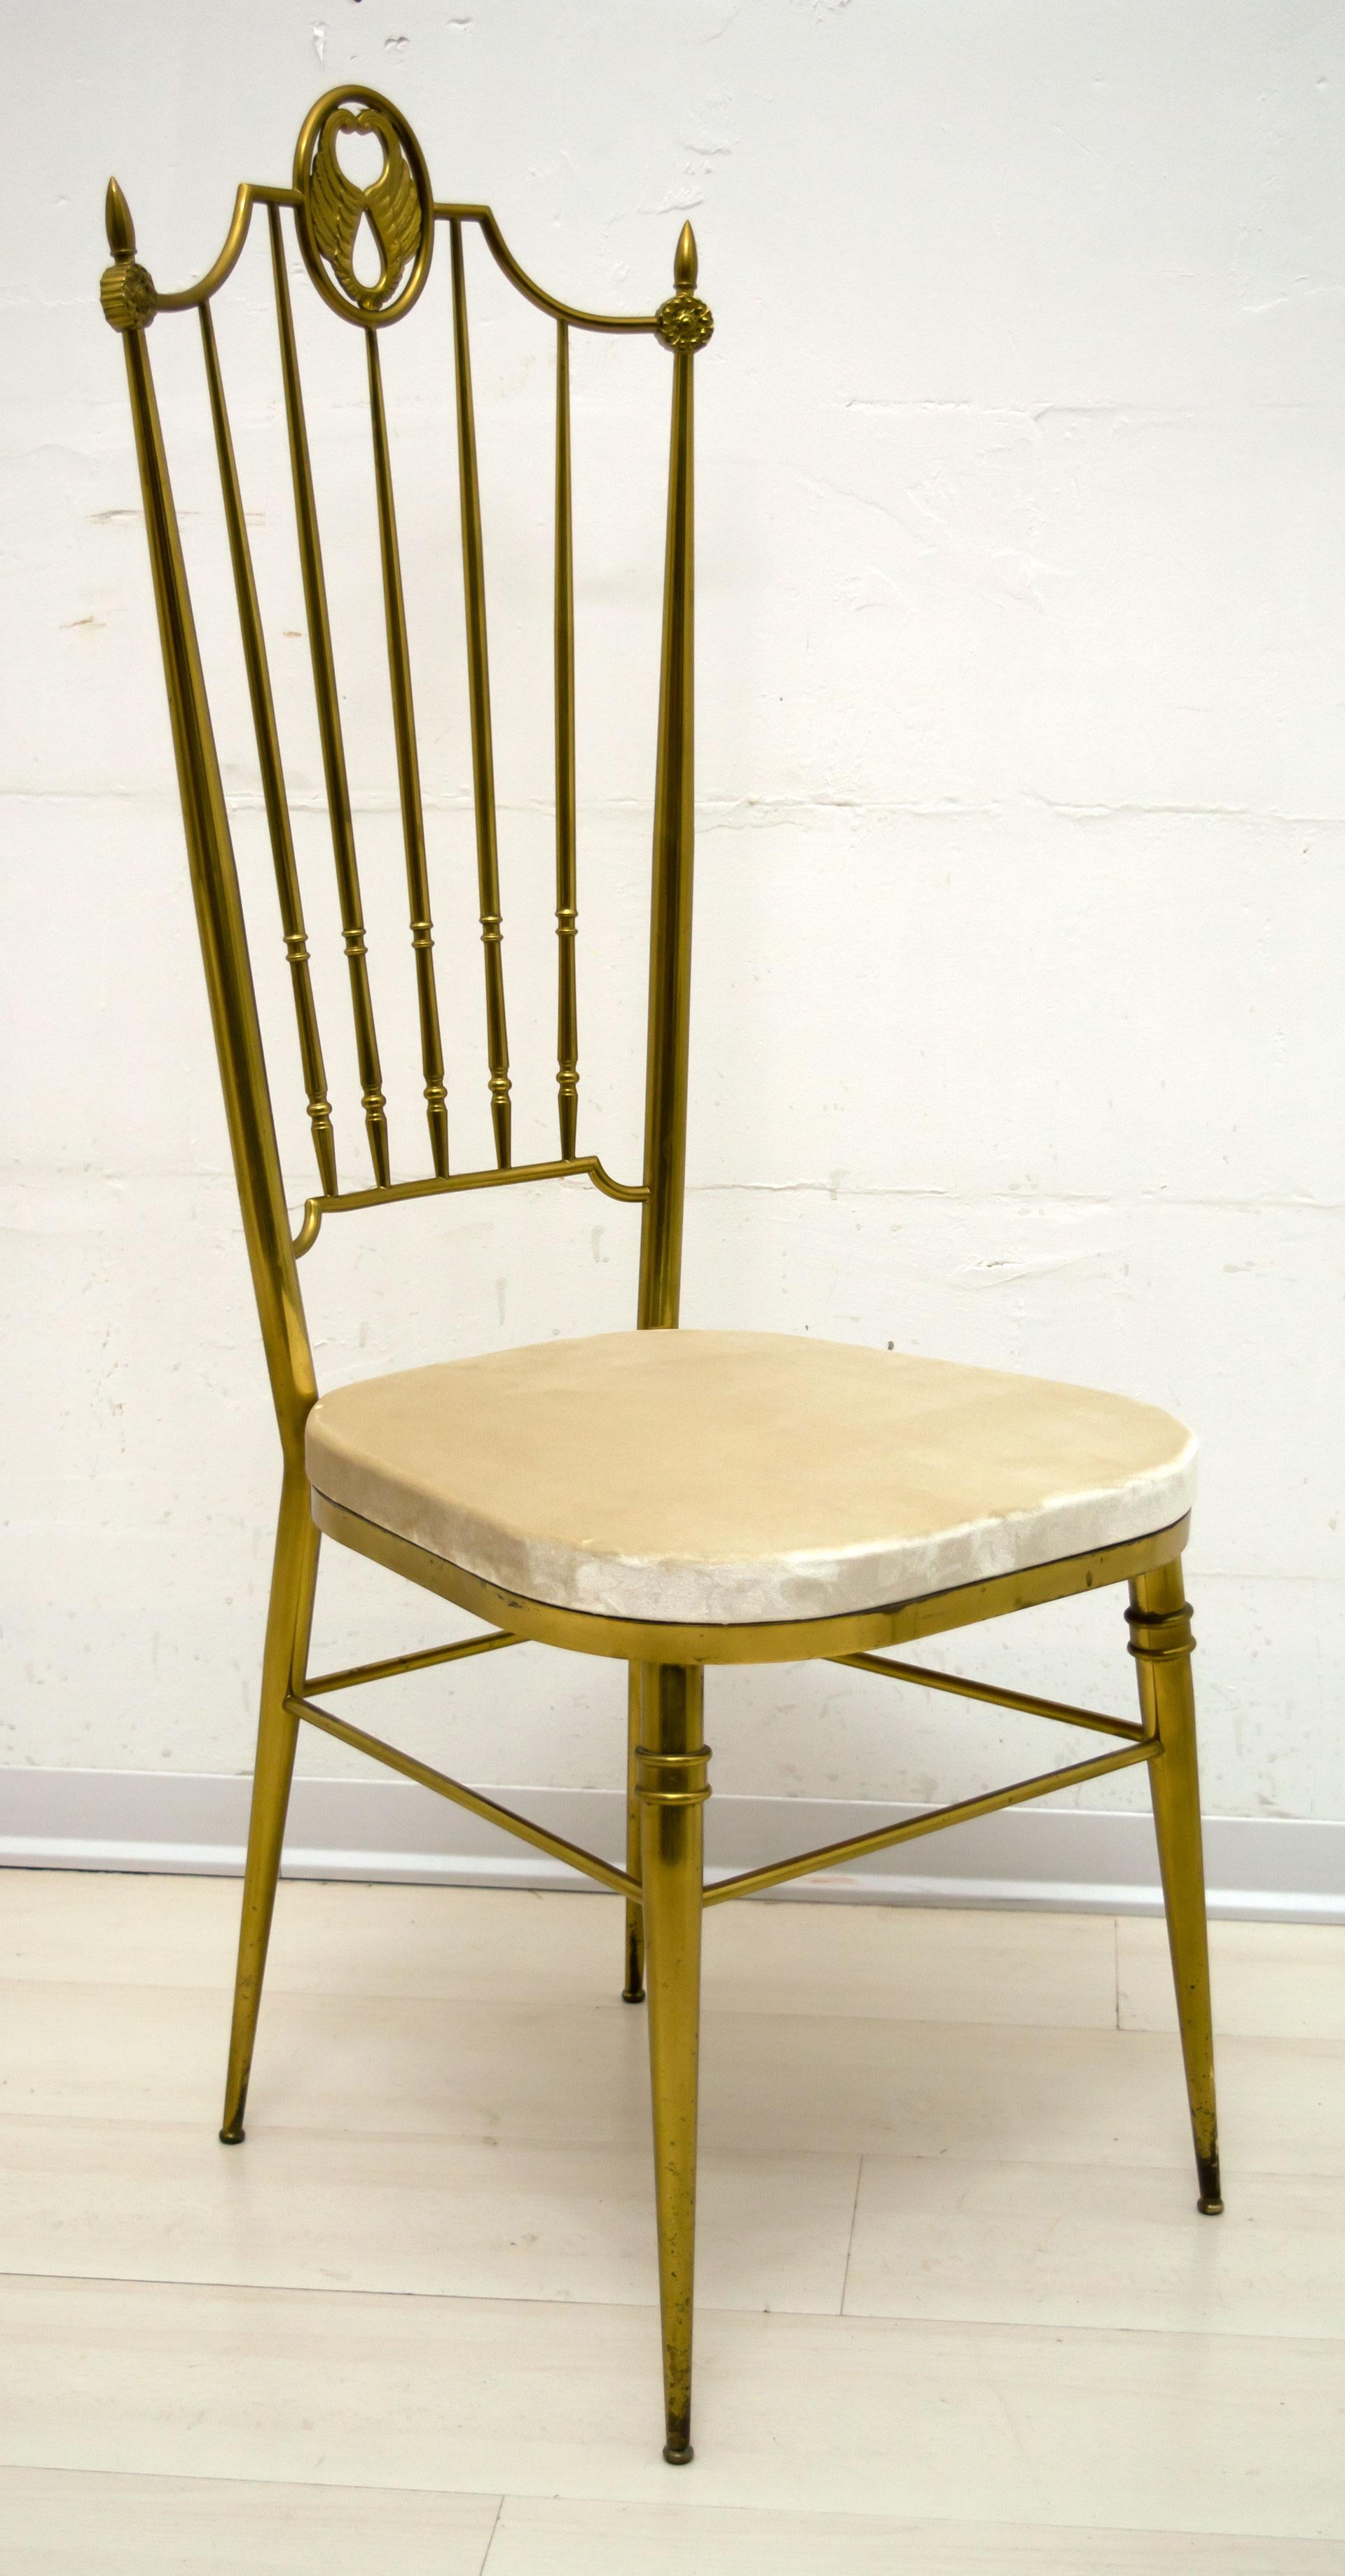 Mid-20th Century After Gio Ponti Mid-Century Modern Italian Brass High Back Chairs, 1950s